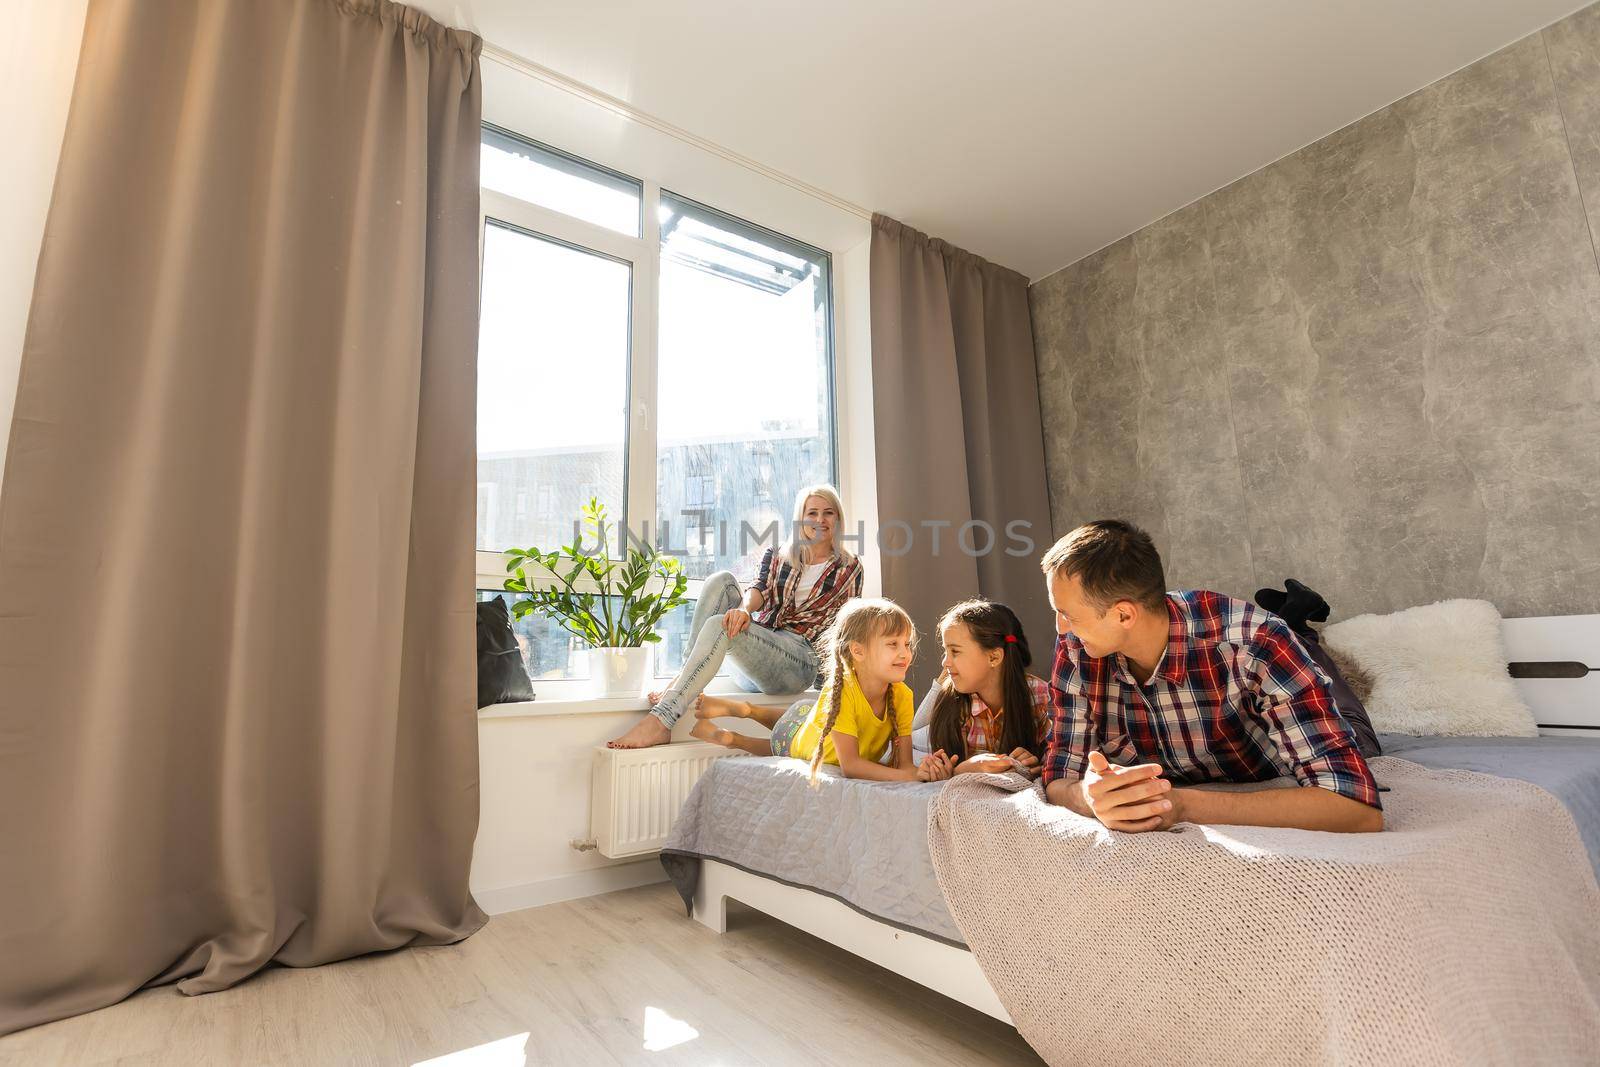 A happy family on white bed in the bedroom